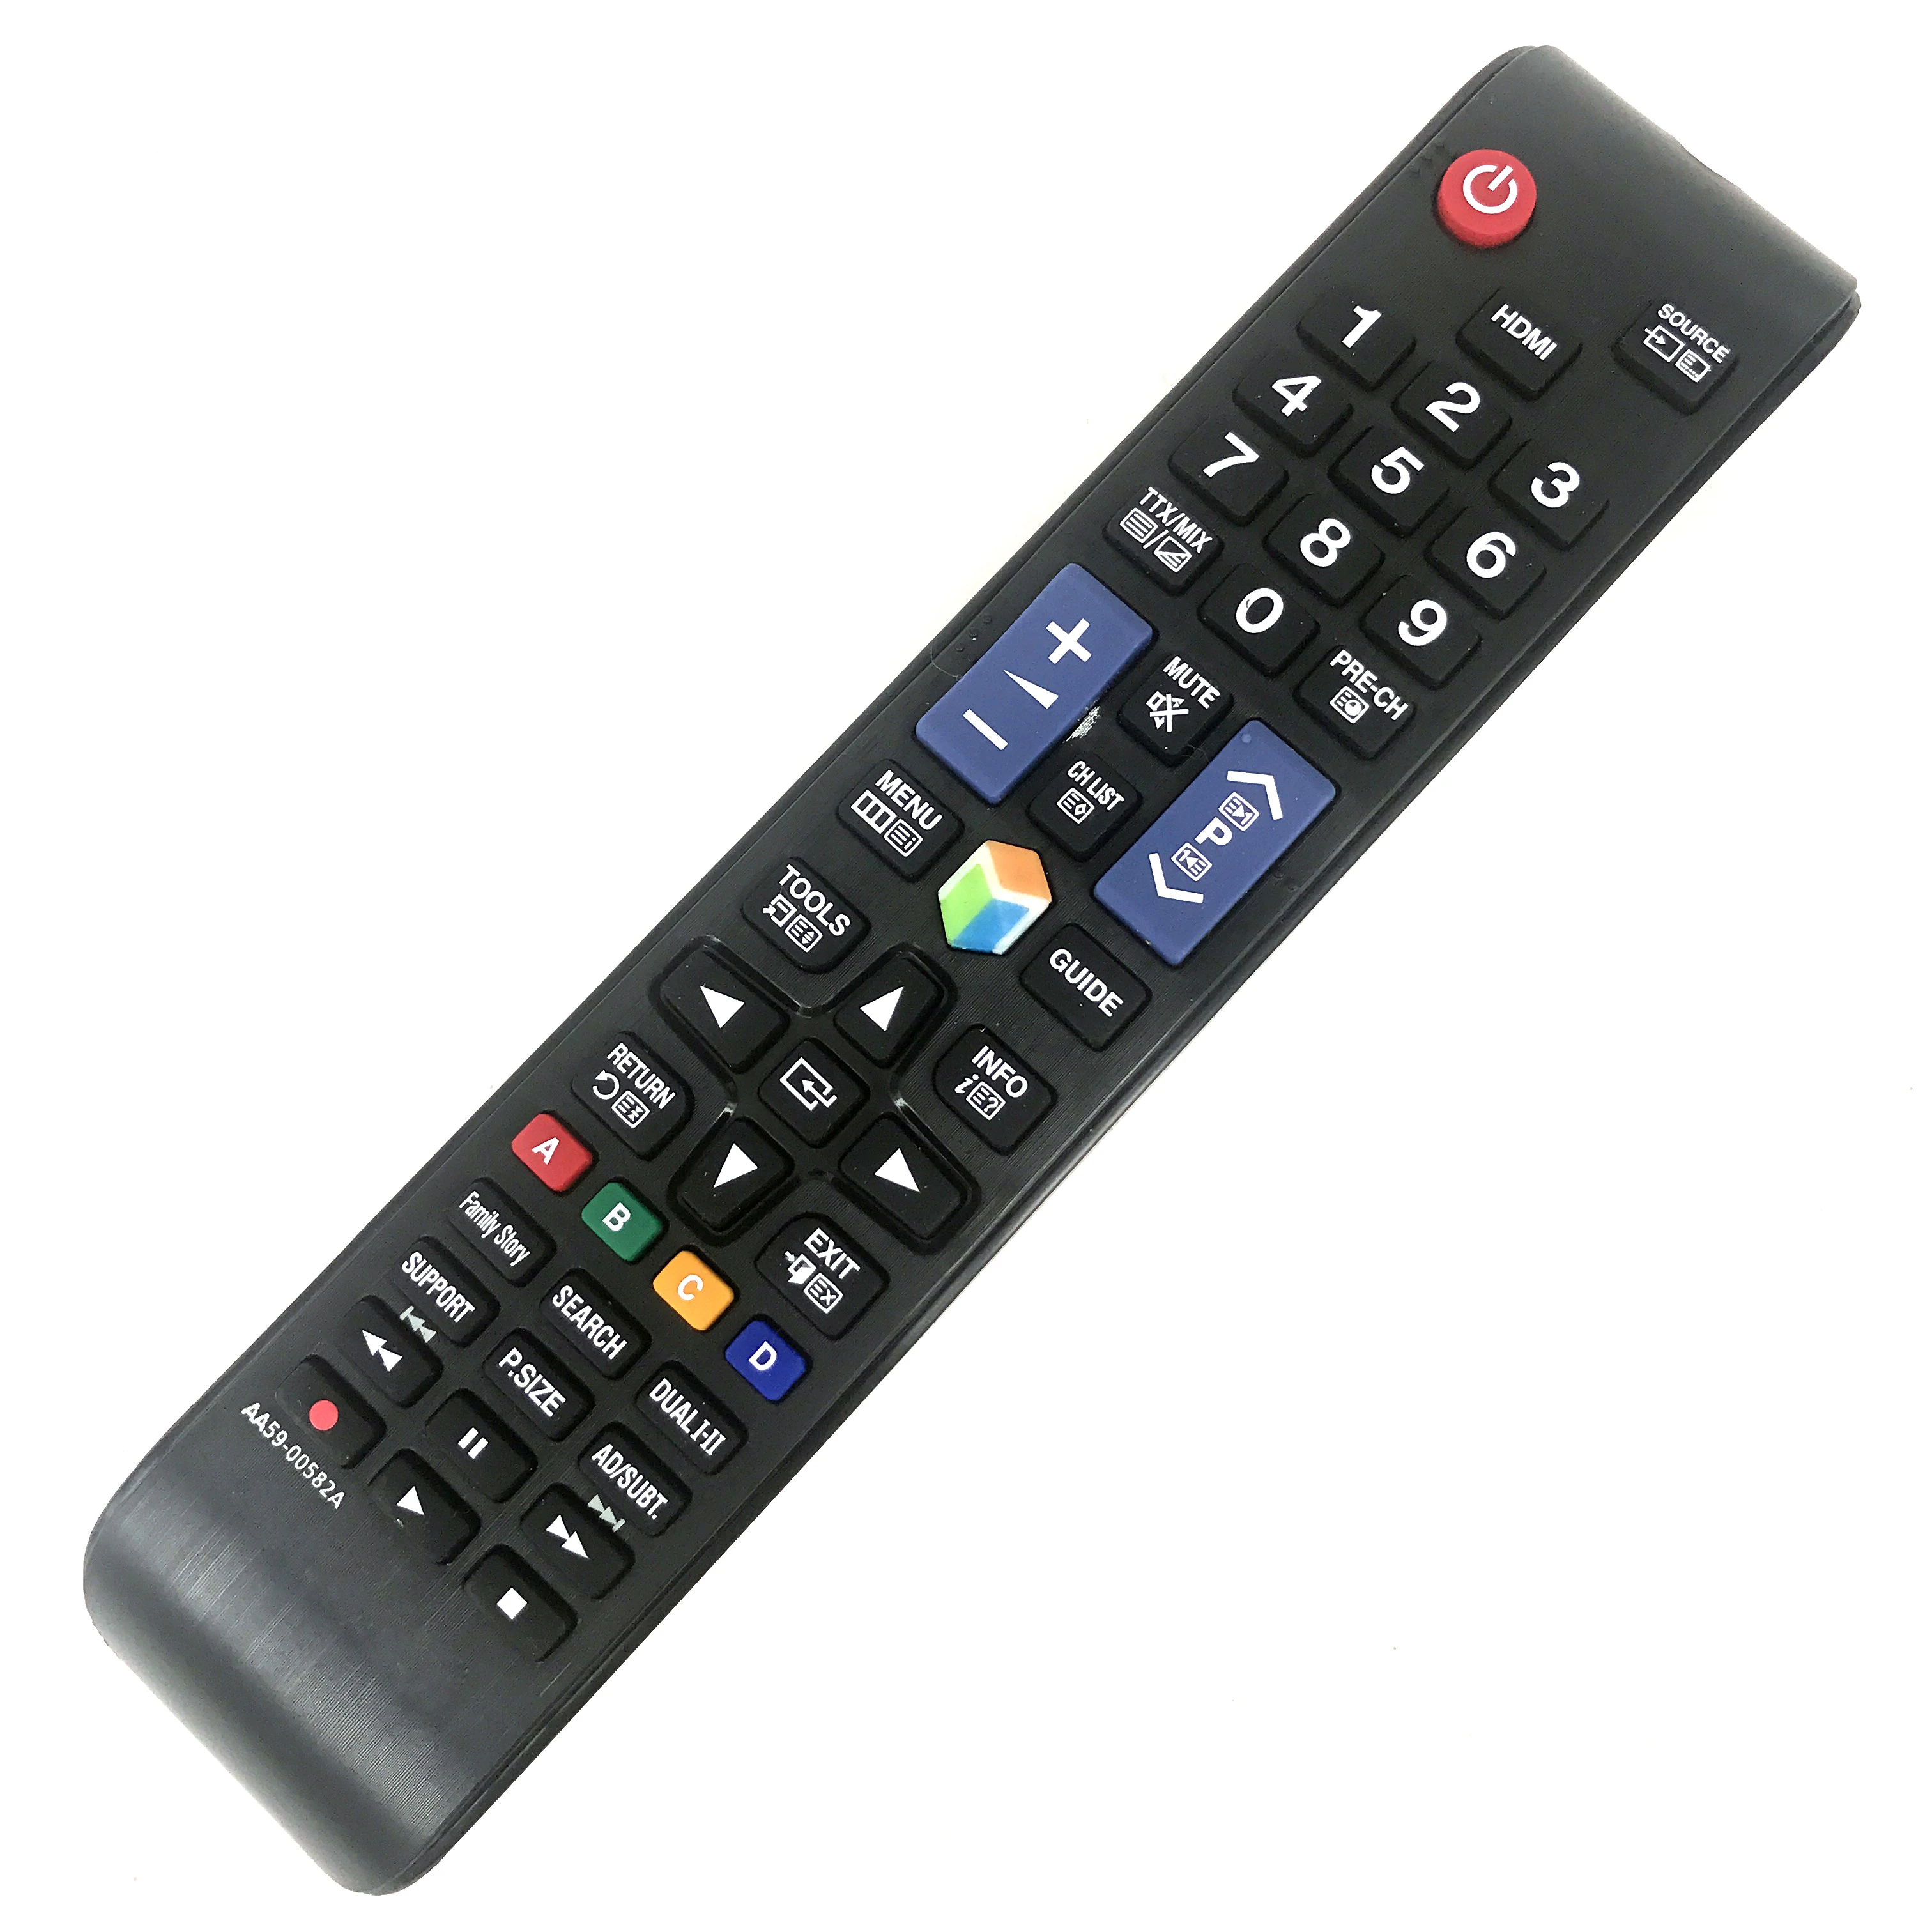 

New remote control AA59-00582A For Samsung SMART LCD LED TV AA59-00638A AA59-00637A